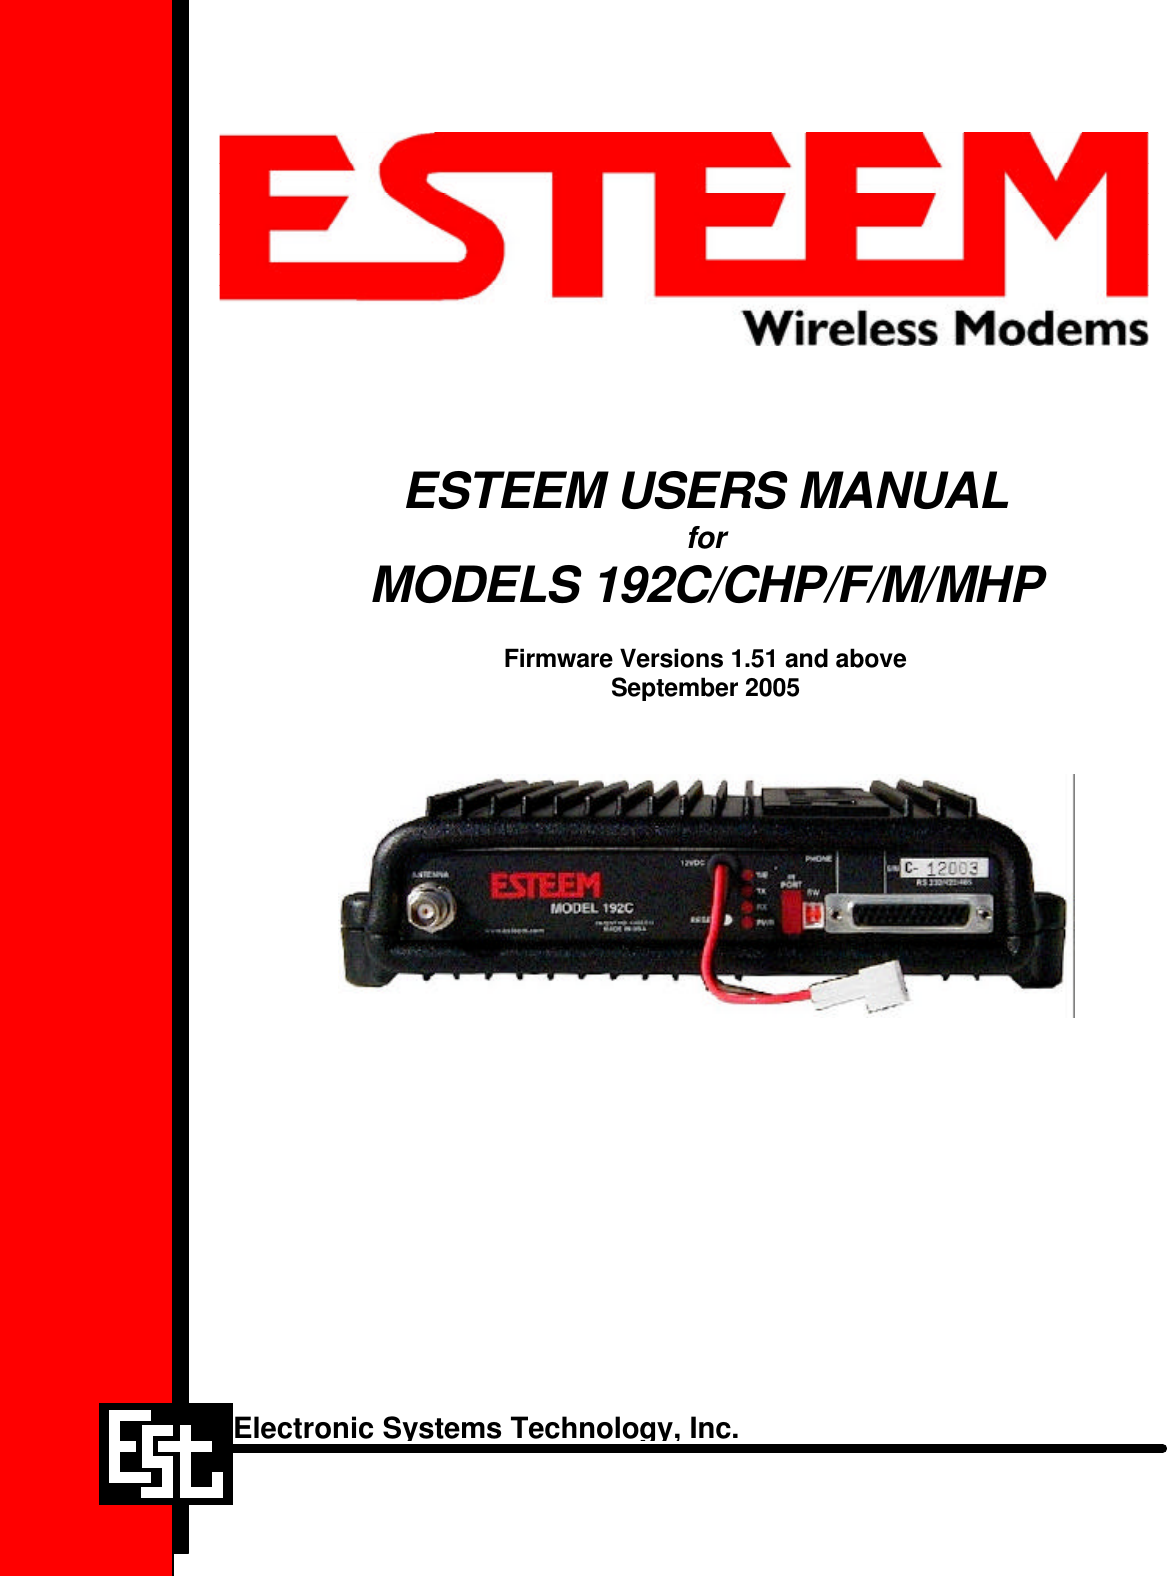 ESTEEM USERS MANUALforMODELS 192C/CHP/F/M/MHPFirmware Versions 1.51 and aboveSeptember 2005Electronic Systems Technology, Inc.